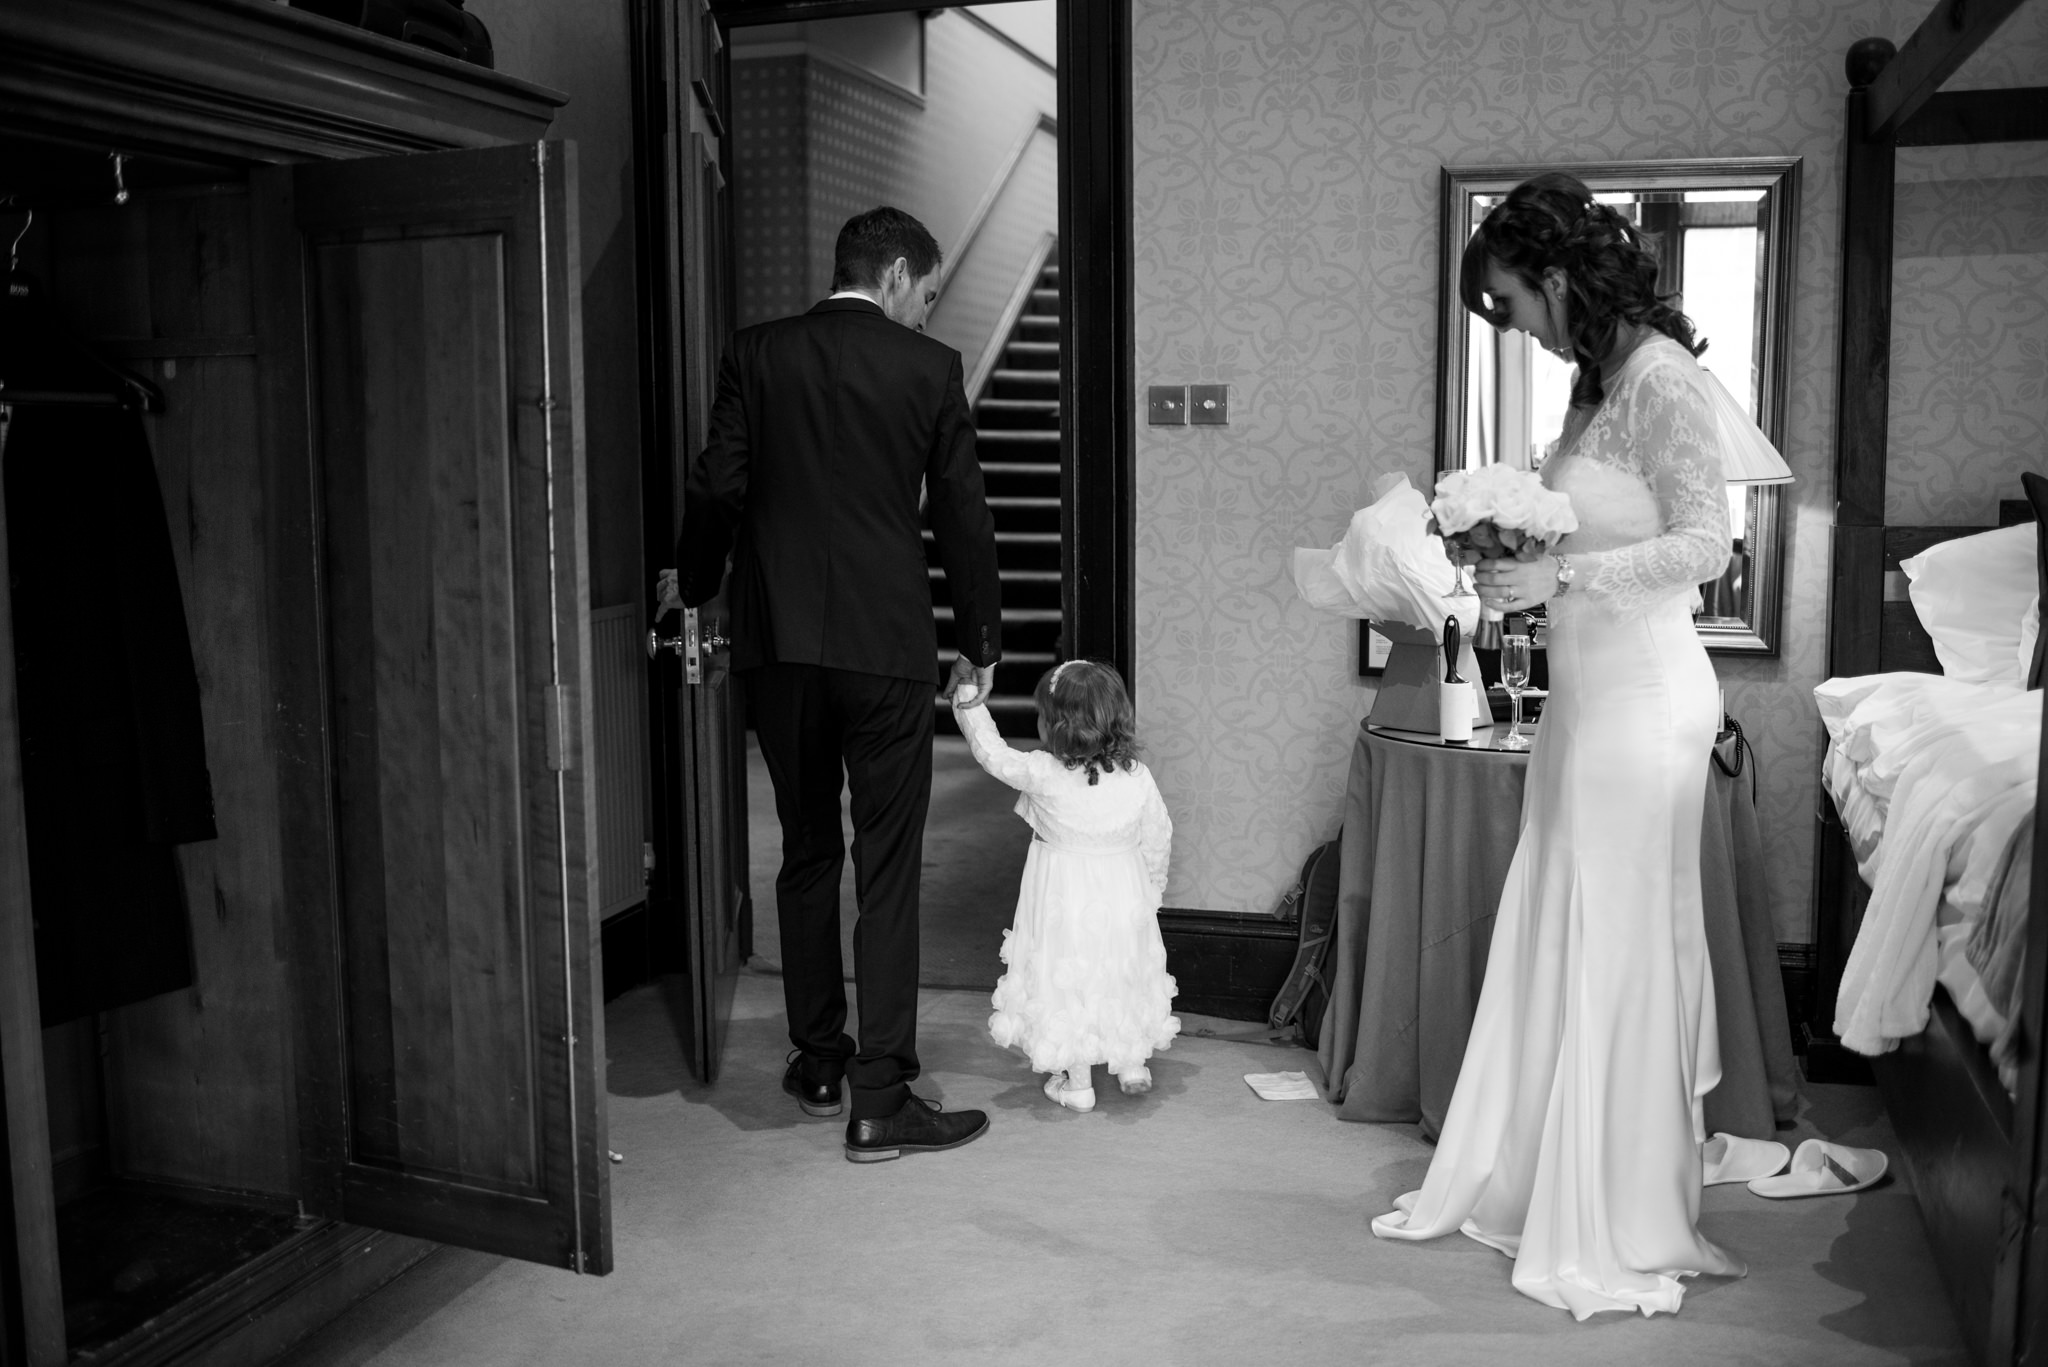  Paul and Claire's wedding at One Devonshire Gardens - © Julie Broadfoot - www.photographybyjuliebee.co.uk 